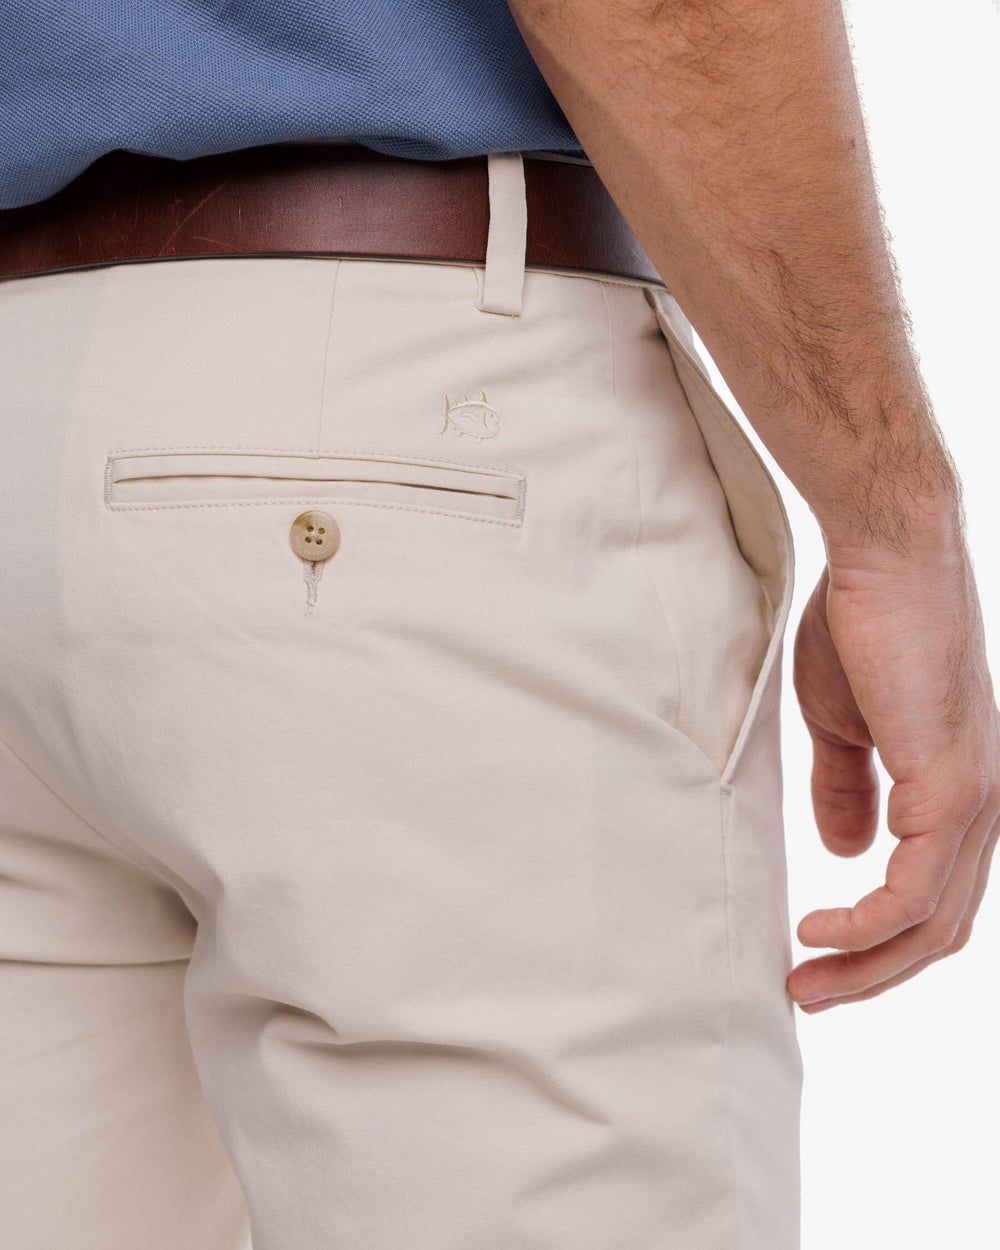 Chinos vs Khakis  Know the Main Differences Between Pants - Nimble Made